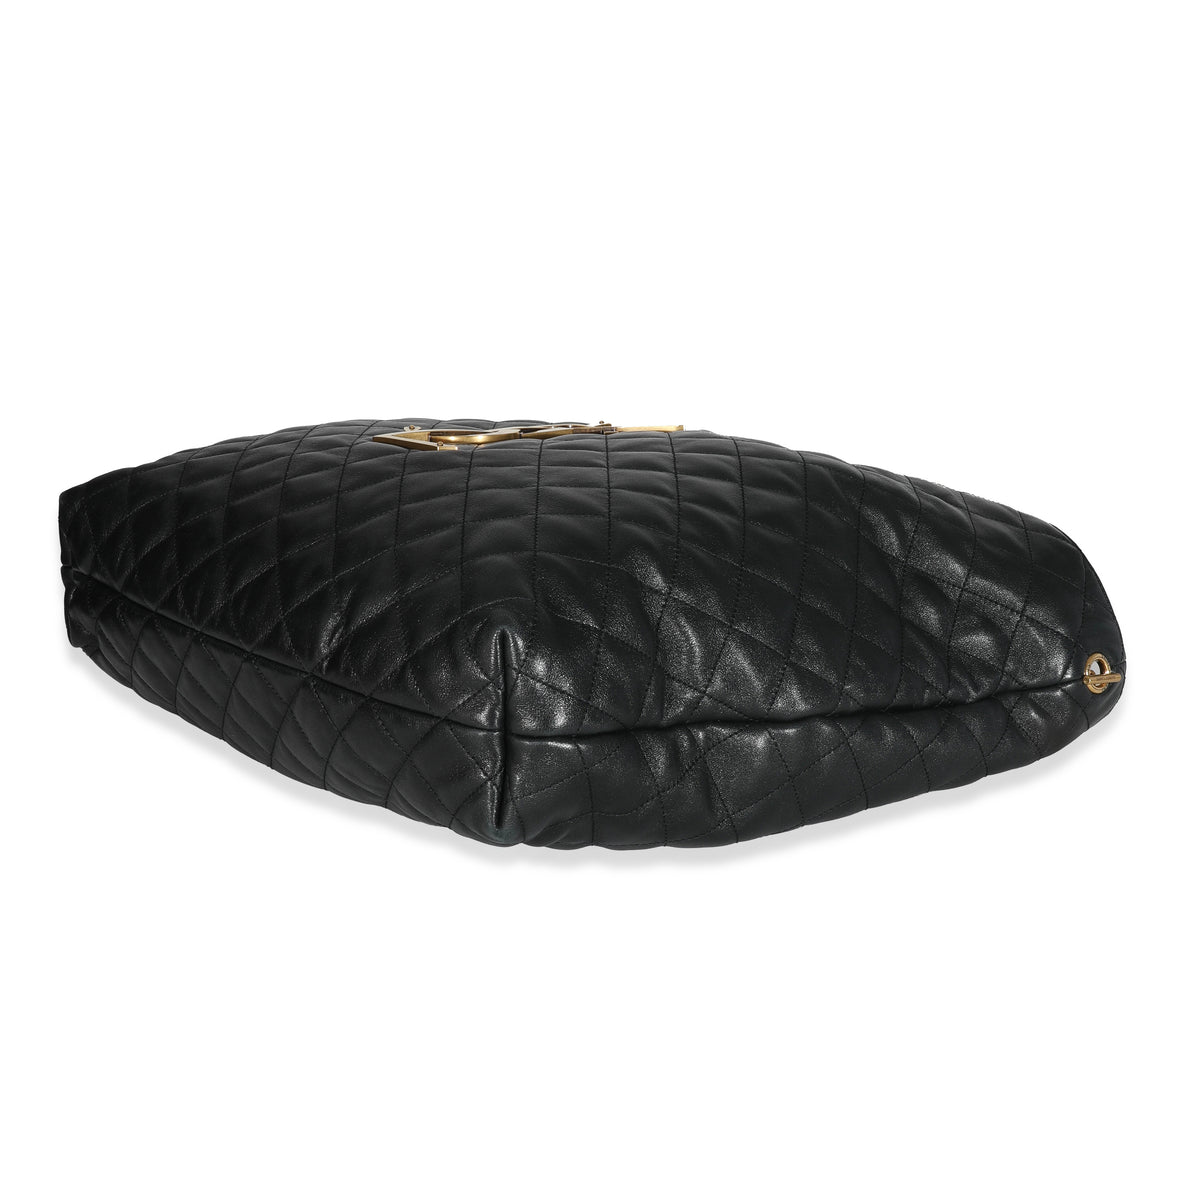 YSL Icare Maxi Shopping bag in quilted lambskin